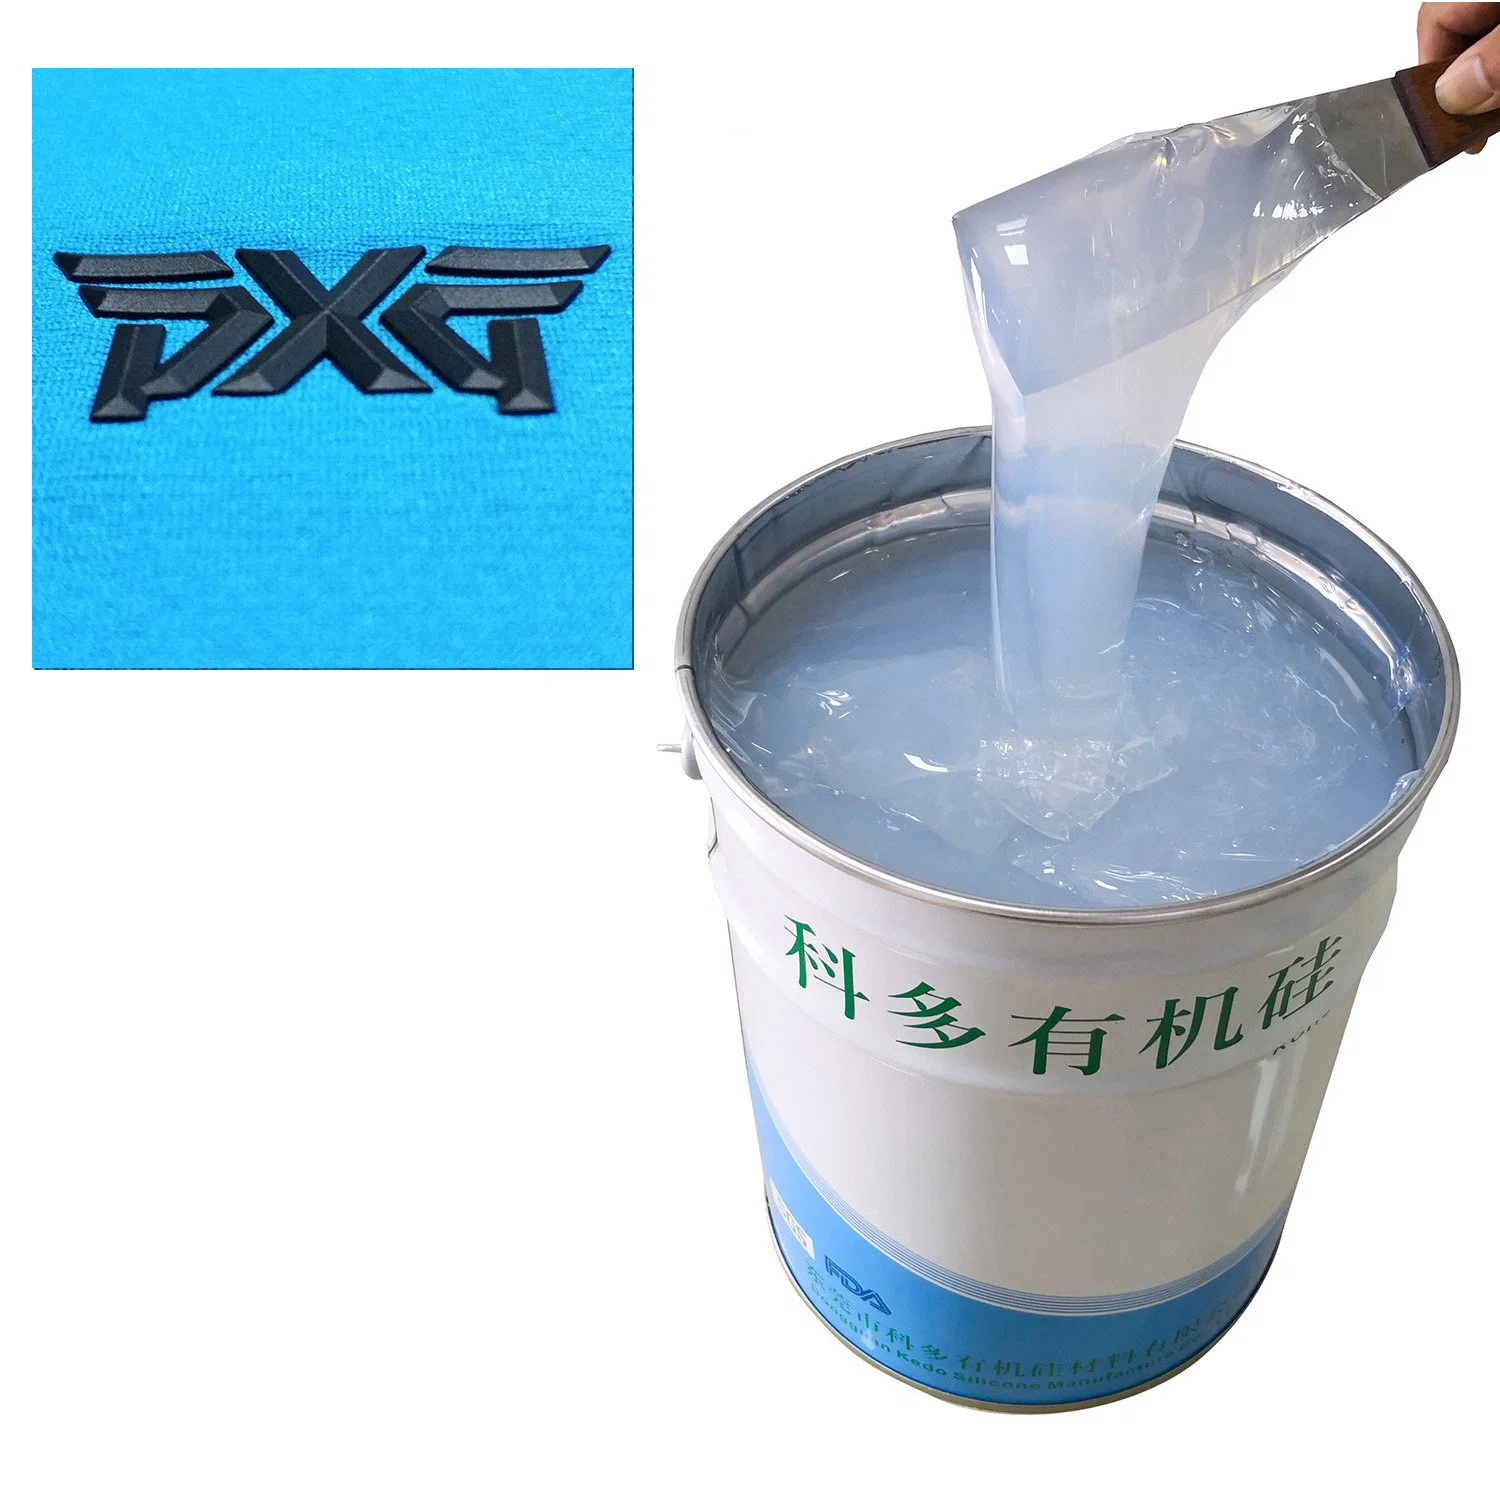 The Top Liquid Silicone Rubber Material for Textile Label Screen Printing Ink